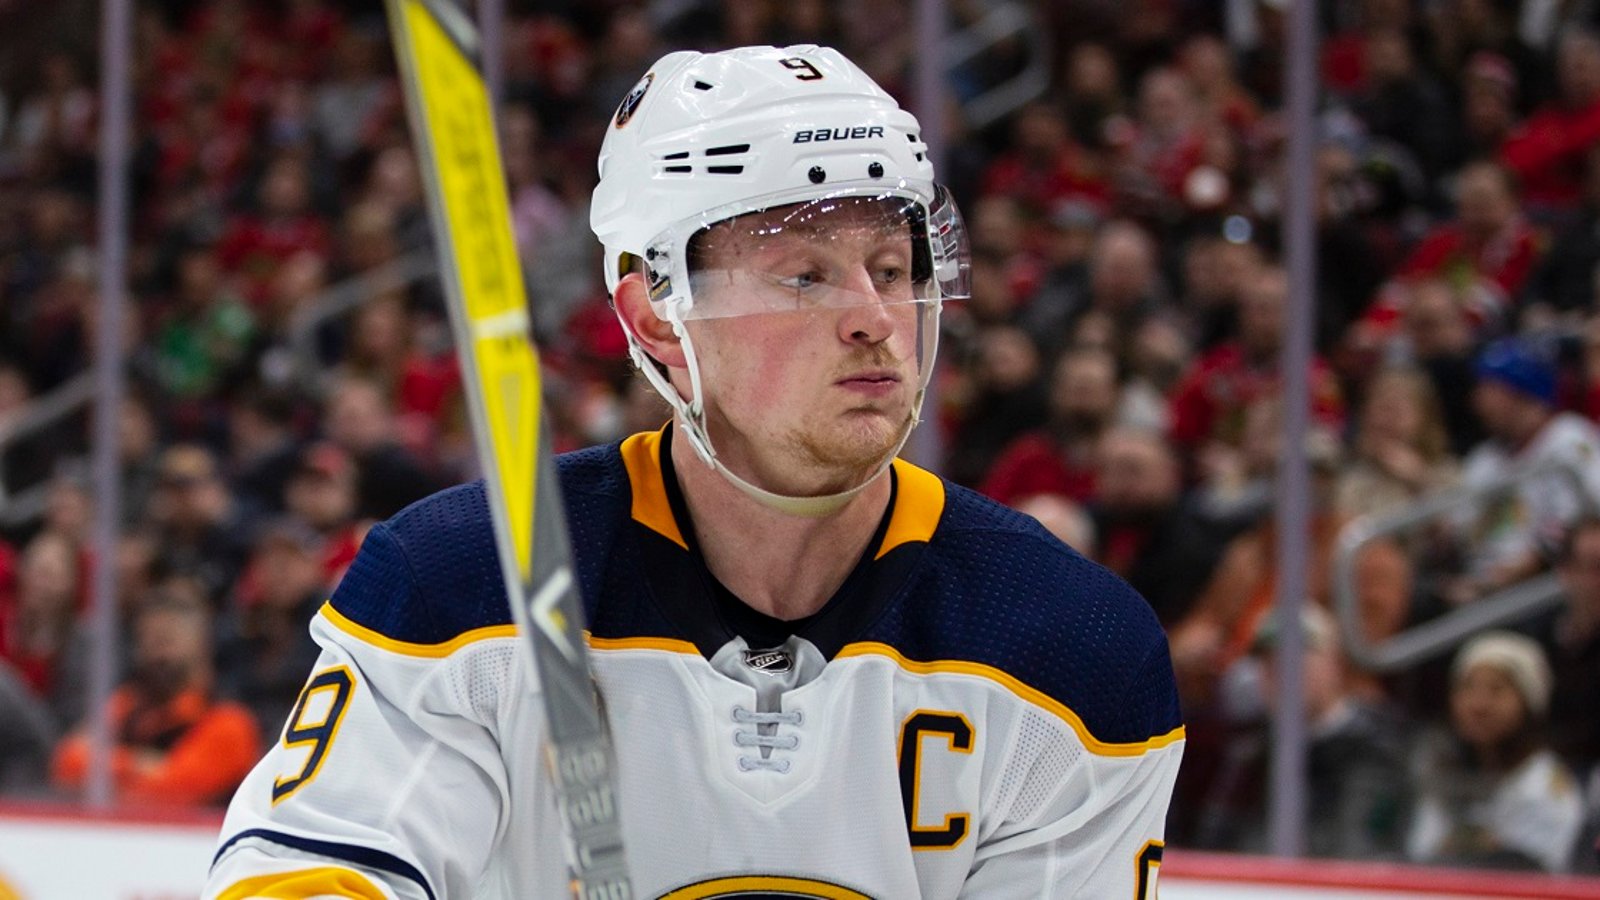 Jack Eichel drops another bombshell during his exit interview.